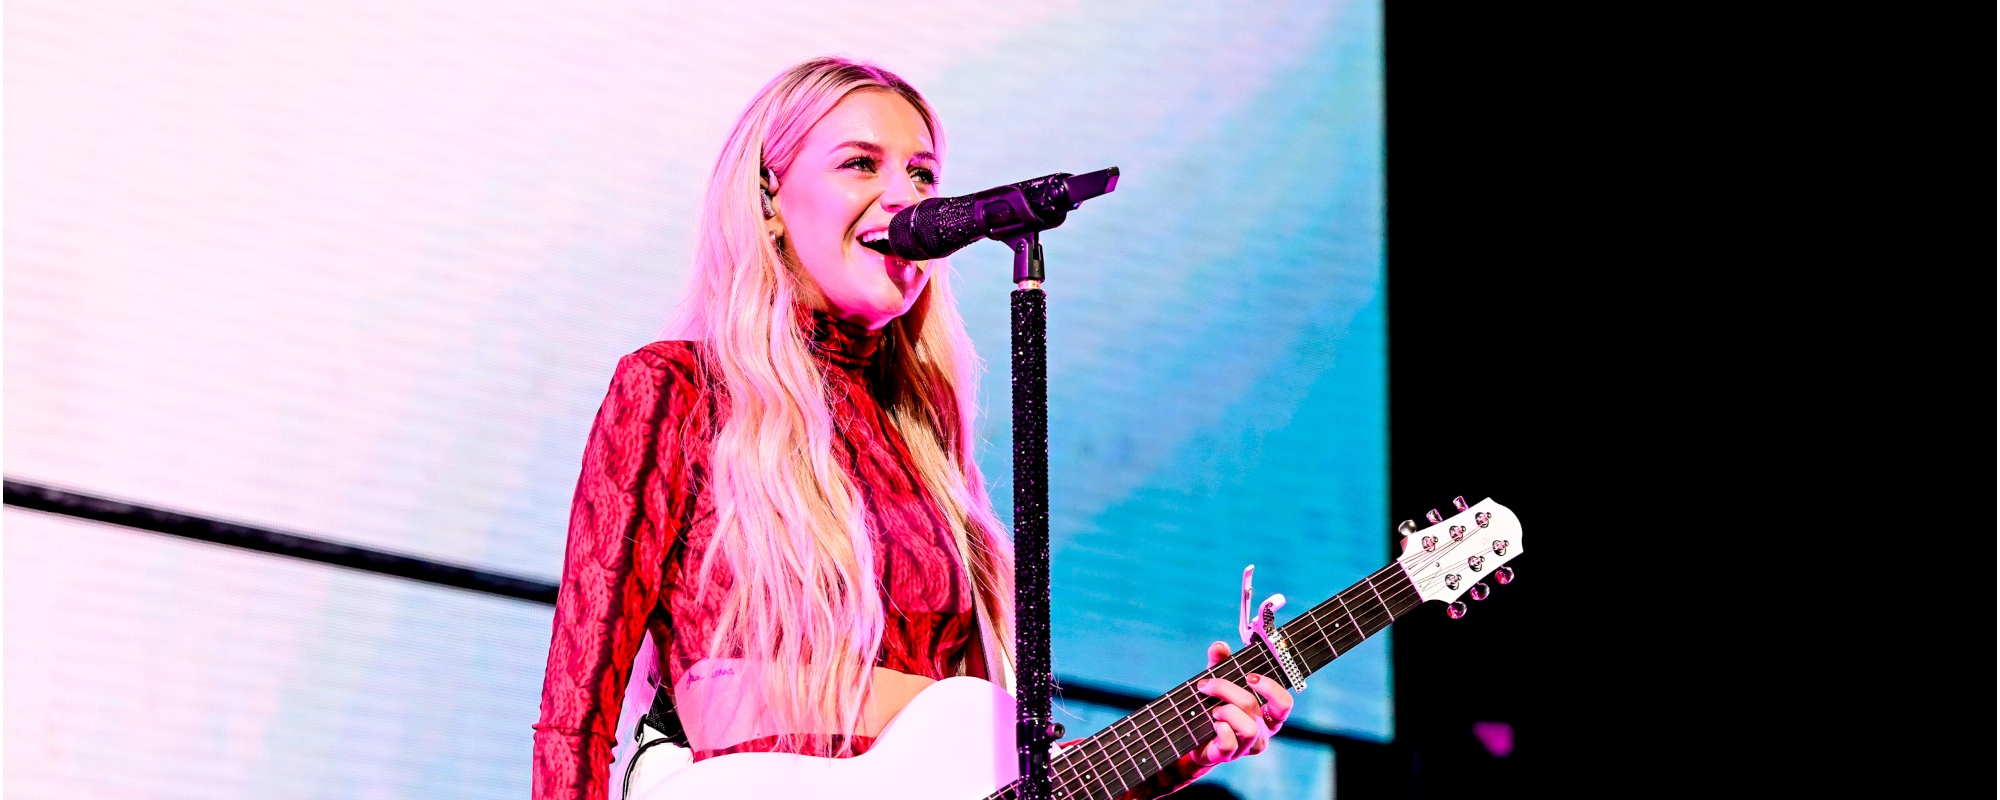 Kelsea Ballerini Performs “Penthouse” at the Grand Ole Opry